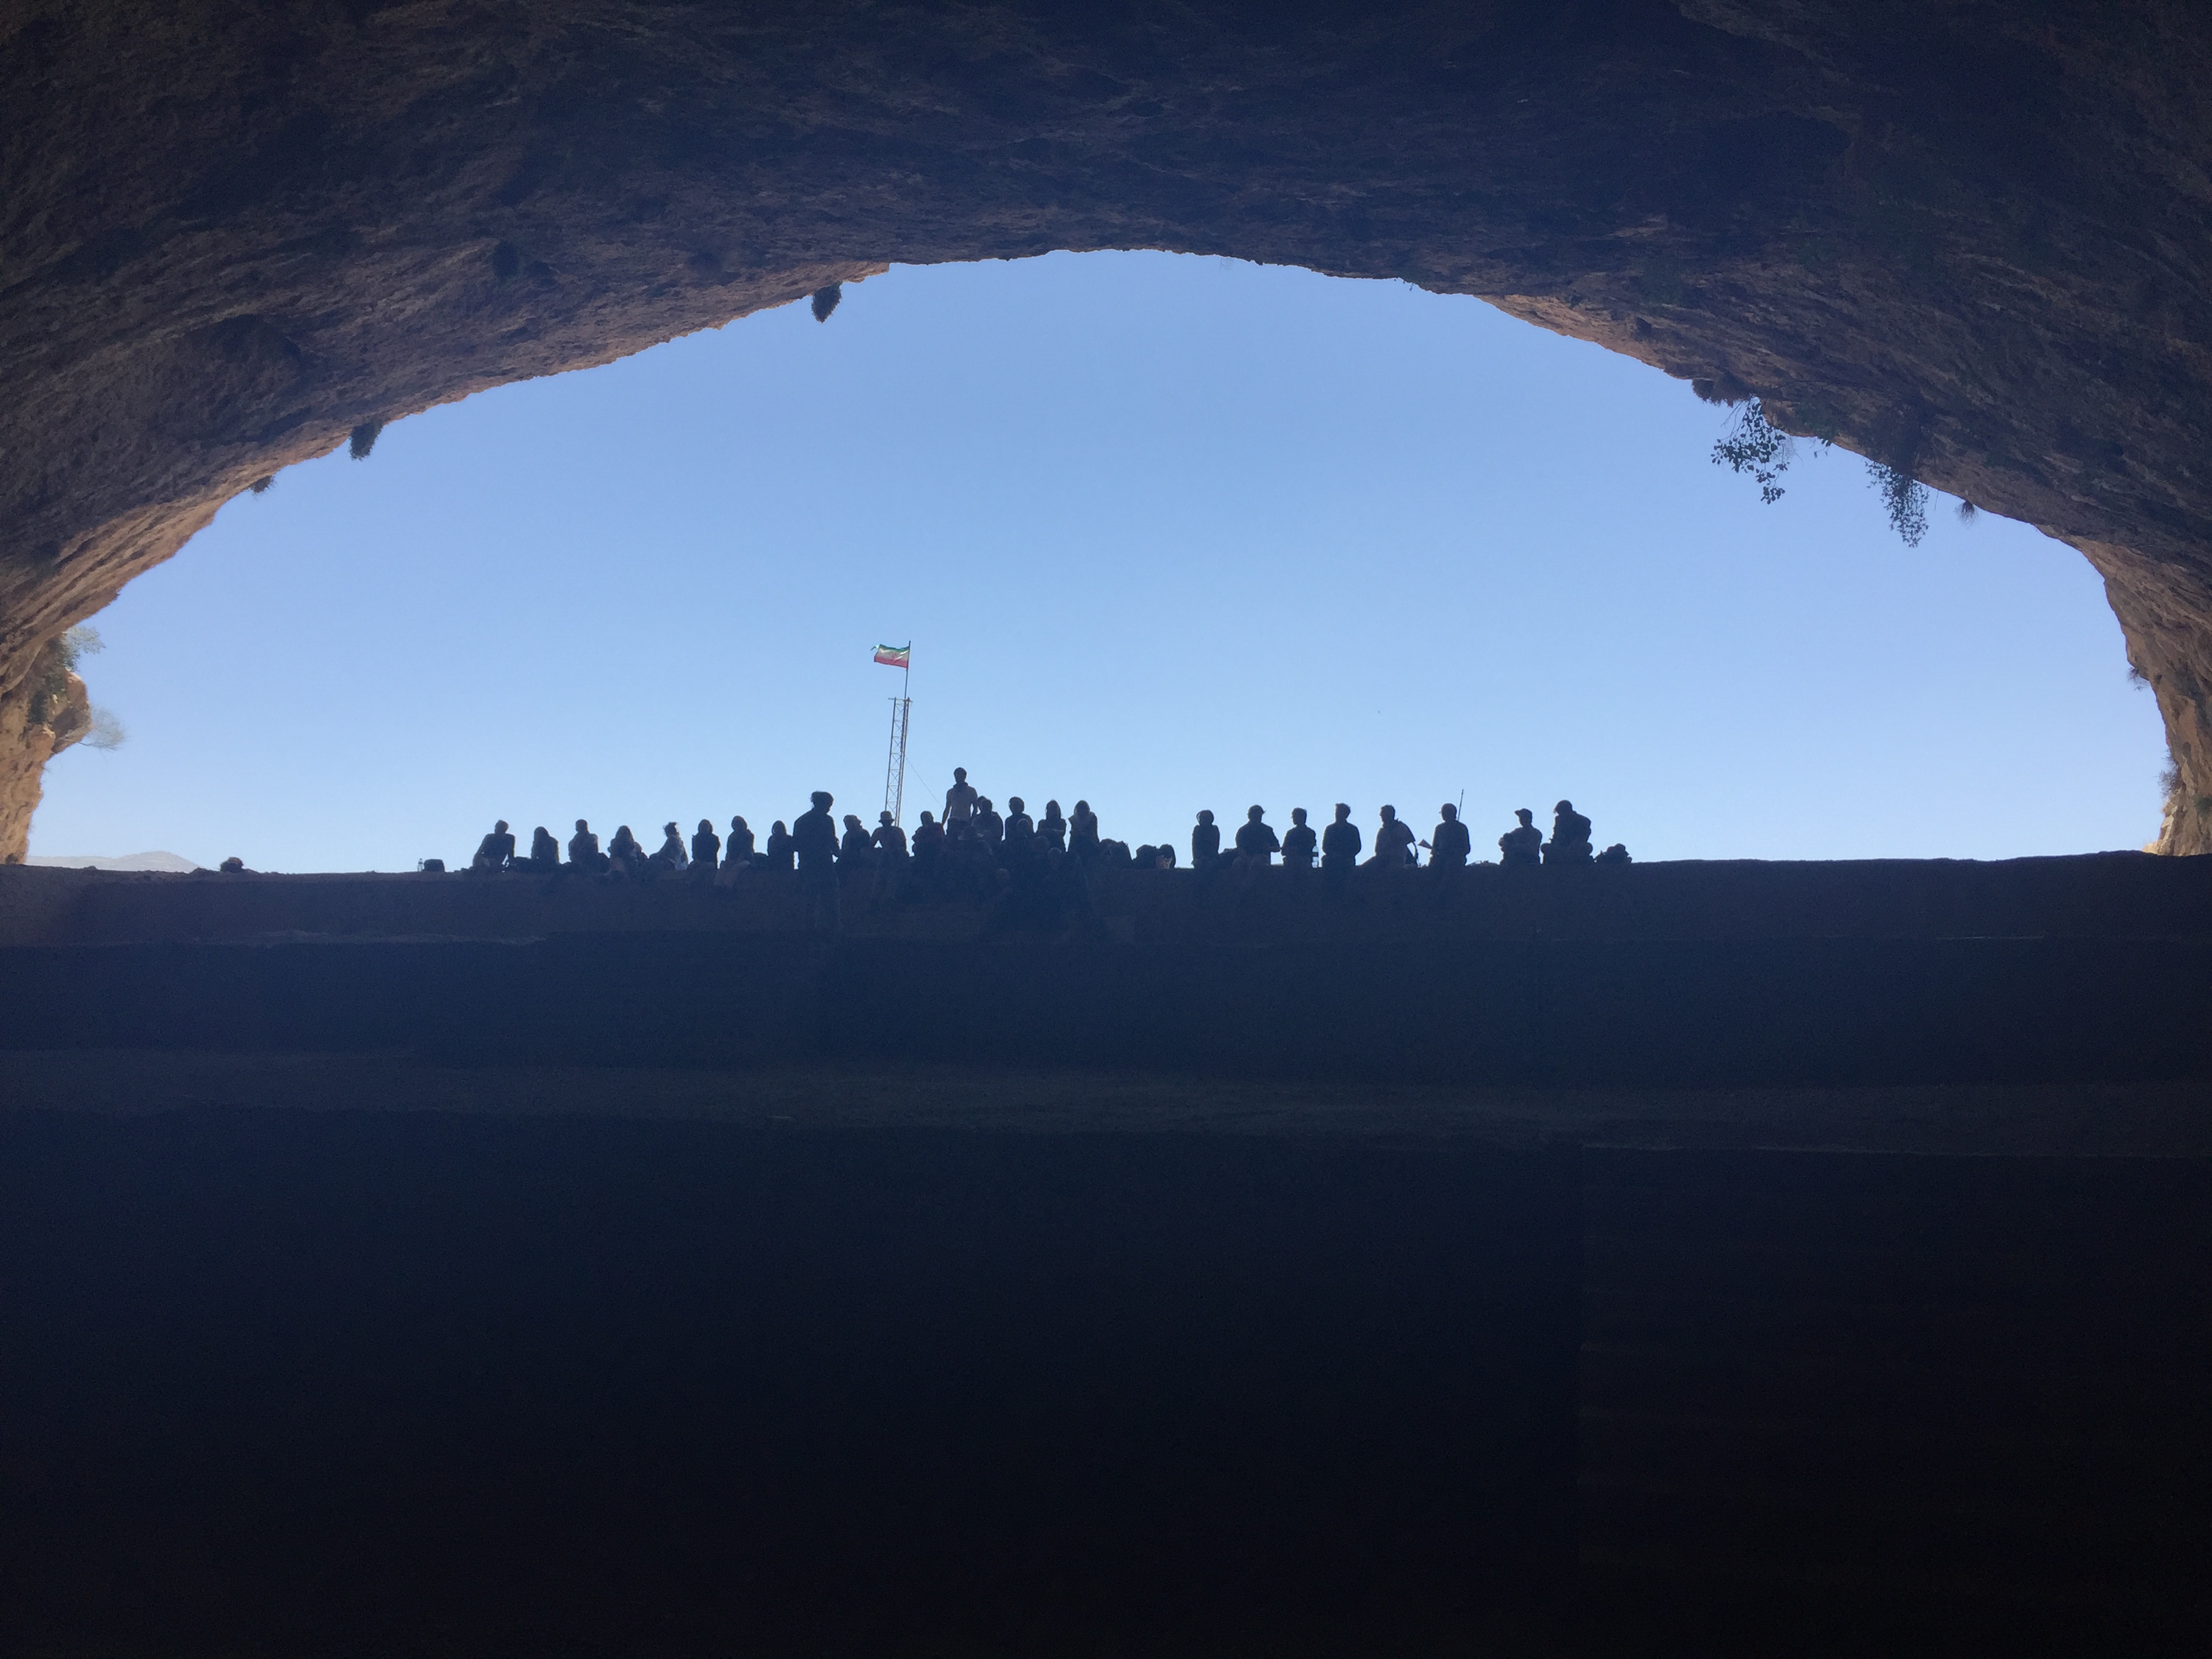 a group of seated people silhouetted against the sky of a cave mouth with an Iranian flag in the background